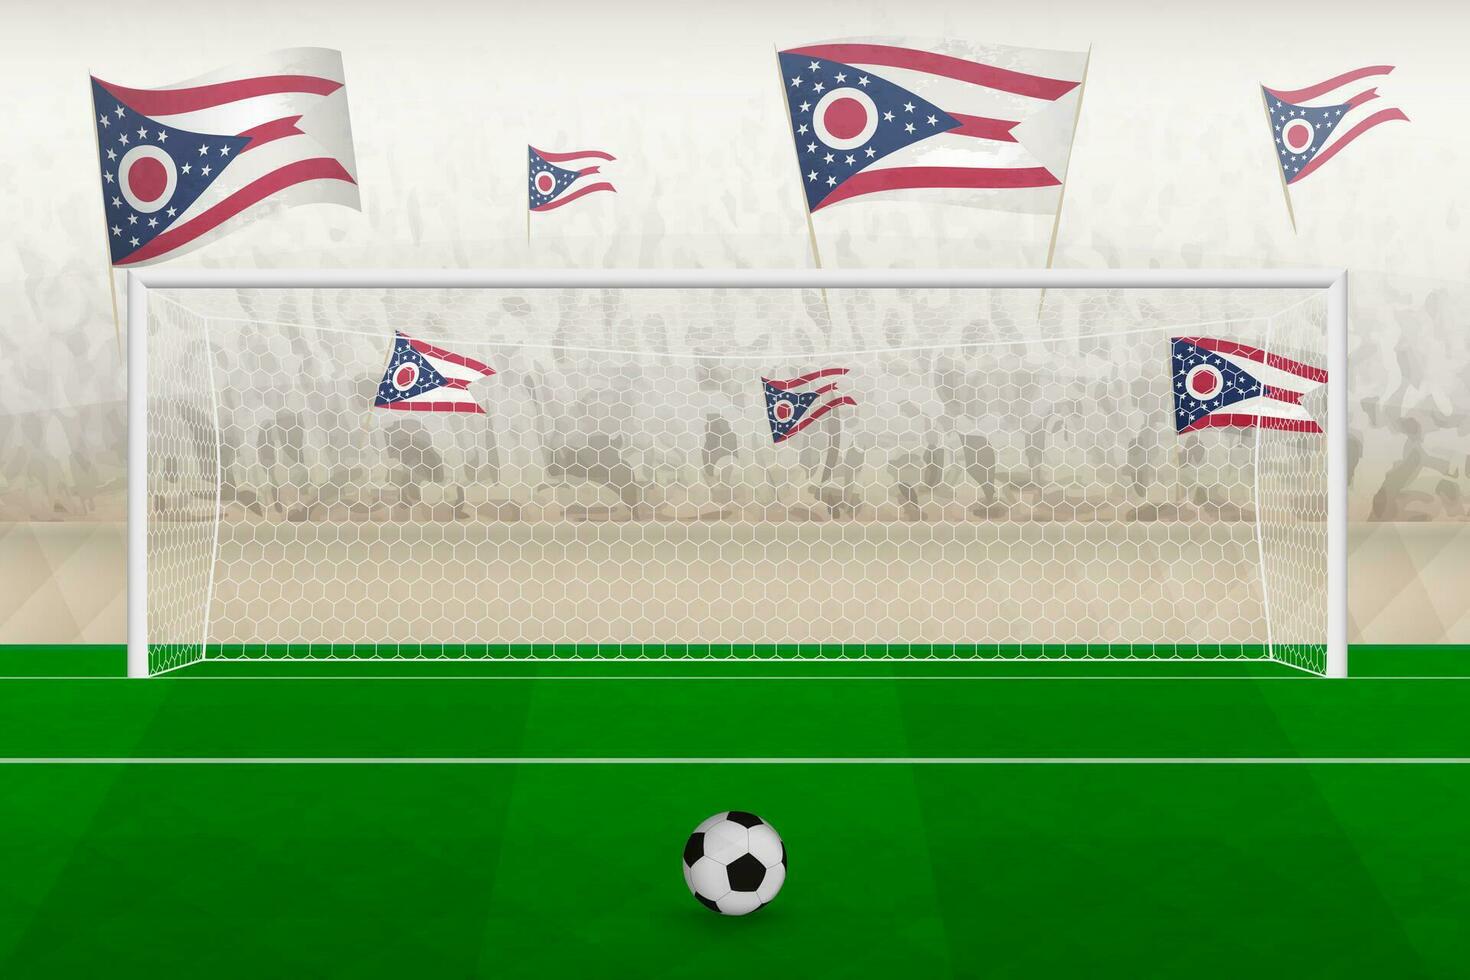 Ohio football team fans with flags of Ohio cheering on stadium, penalty kick concept in a soccer match. vector